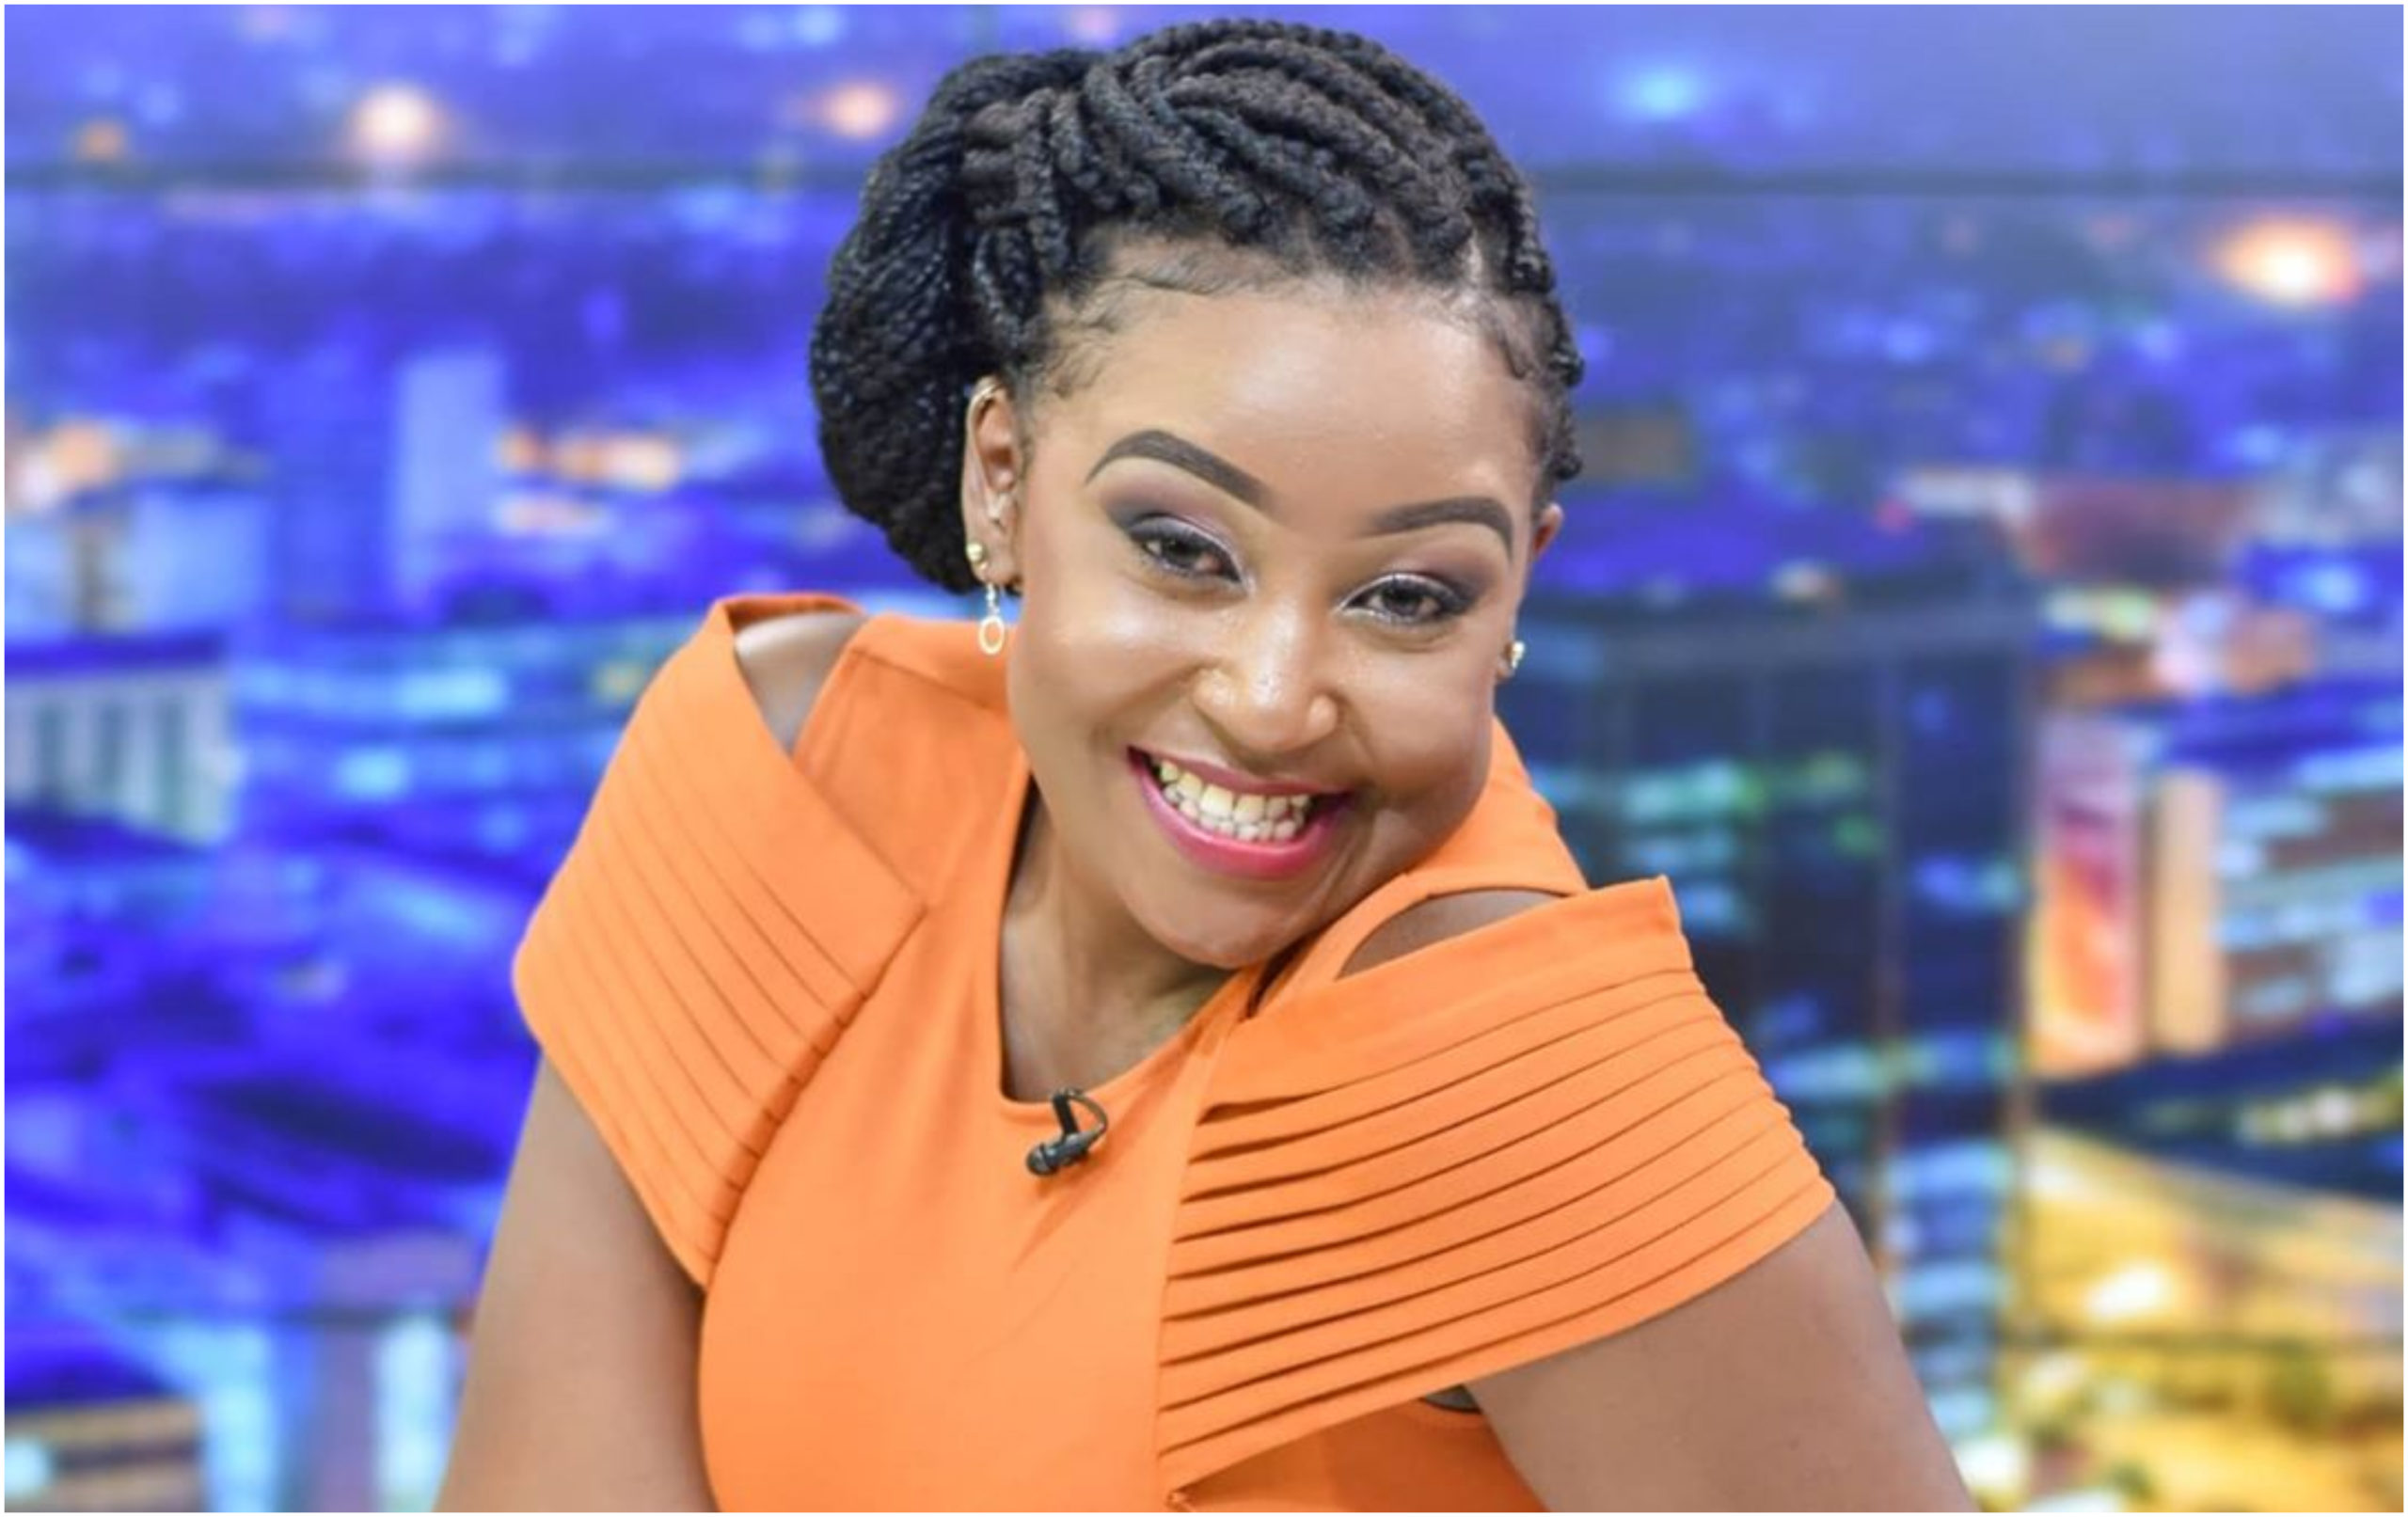 Betty Kyallo is right to take legal action against culprits linking her to explicit video